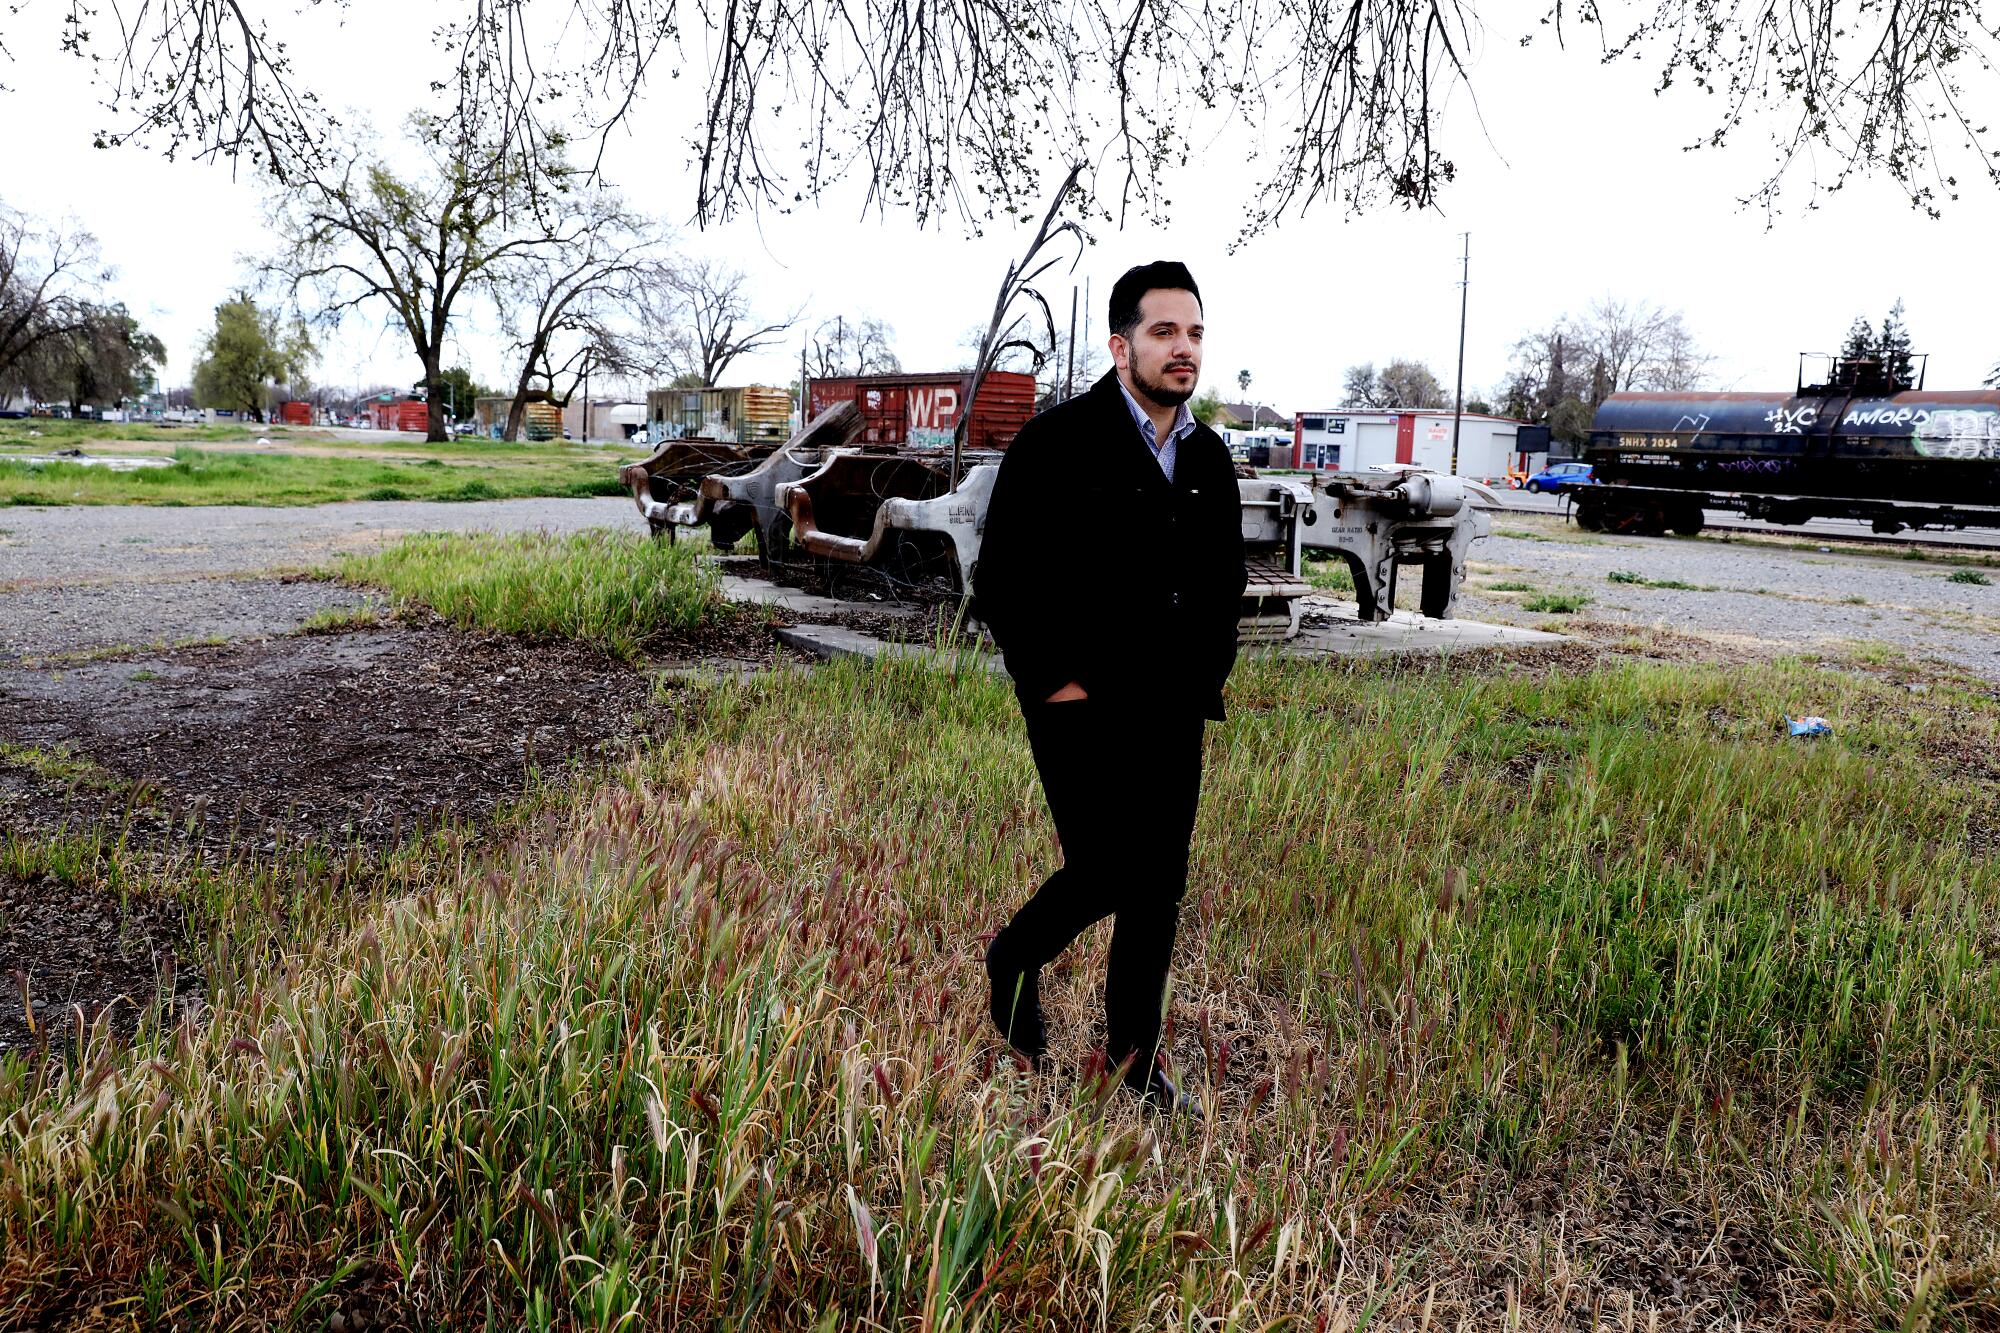 Angel Barajas at an Opportunity Zone on what was once a packing shed for produce in downtown Woodland.